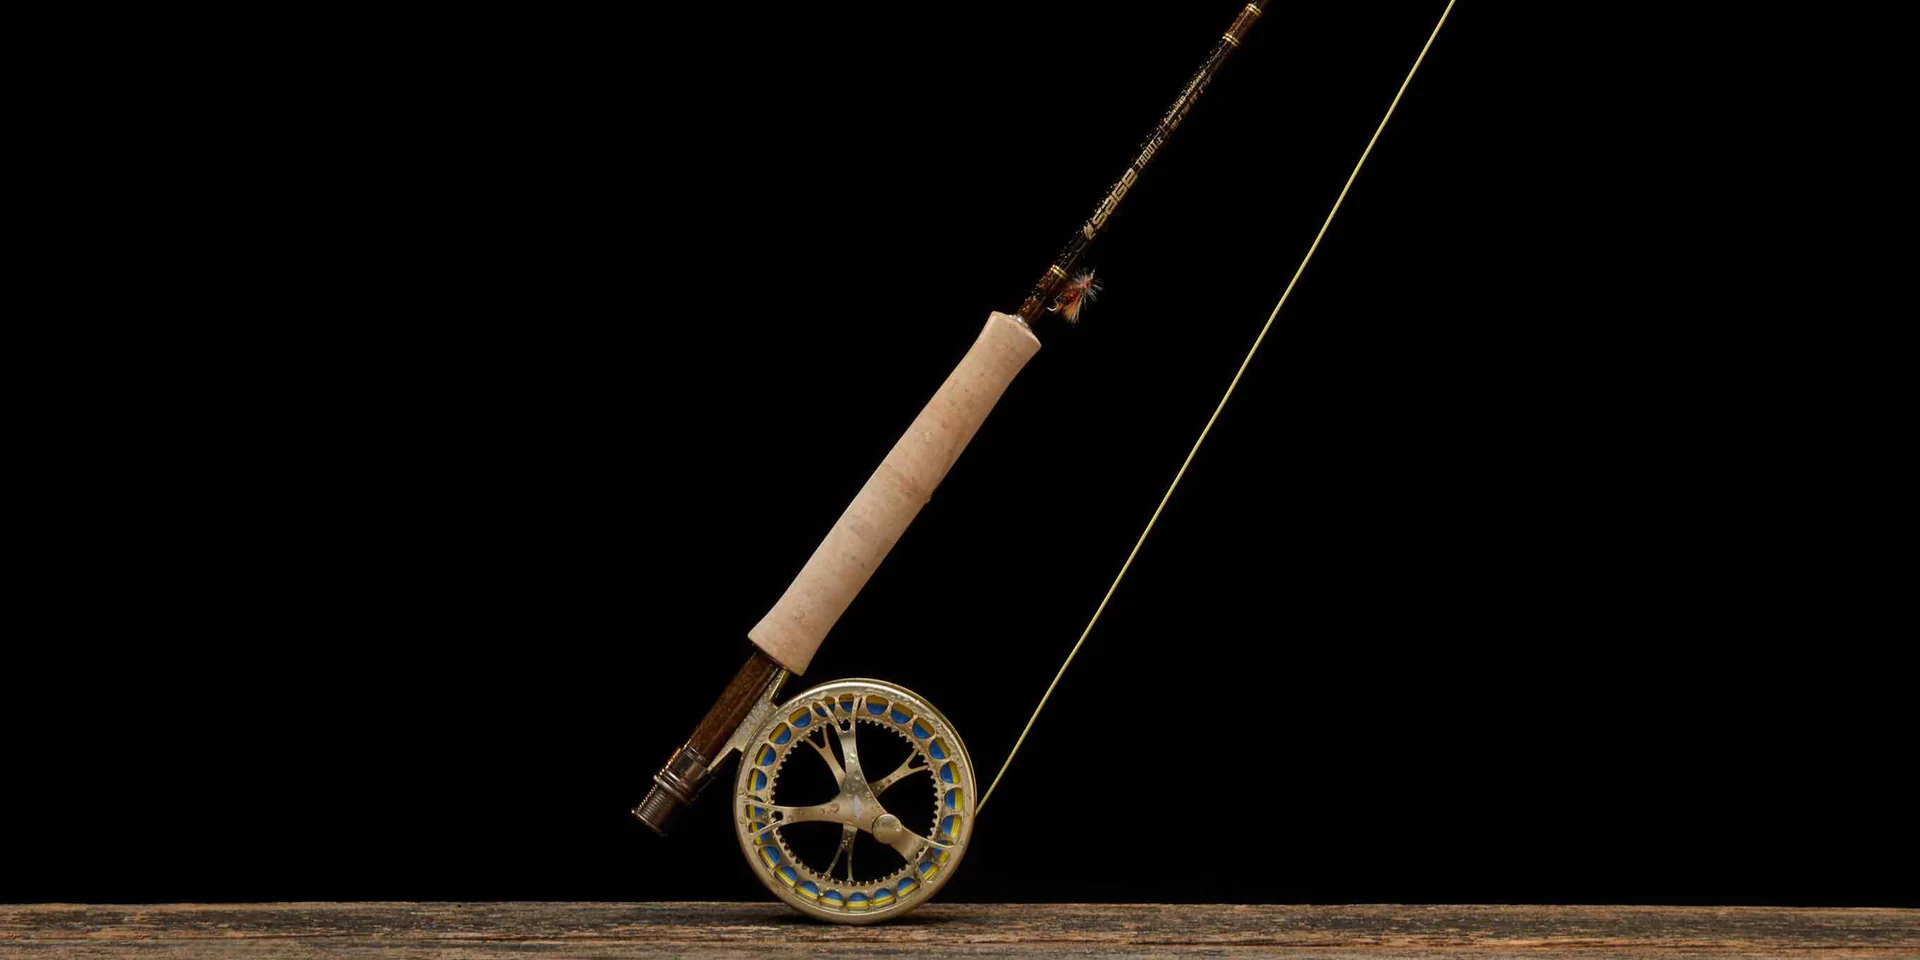 Vision Ultra Light Nymph Line – Guide Flyfishing, Fly Fishing Rods, Reels, Sage, Redington, RIO